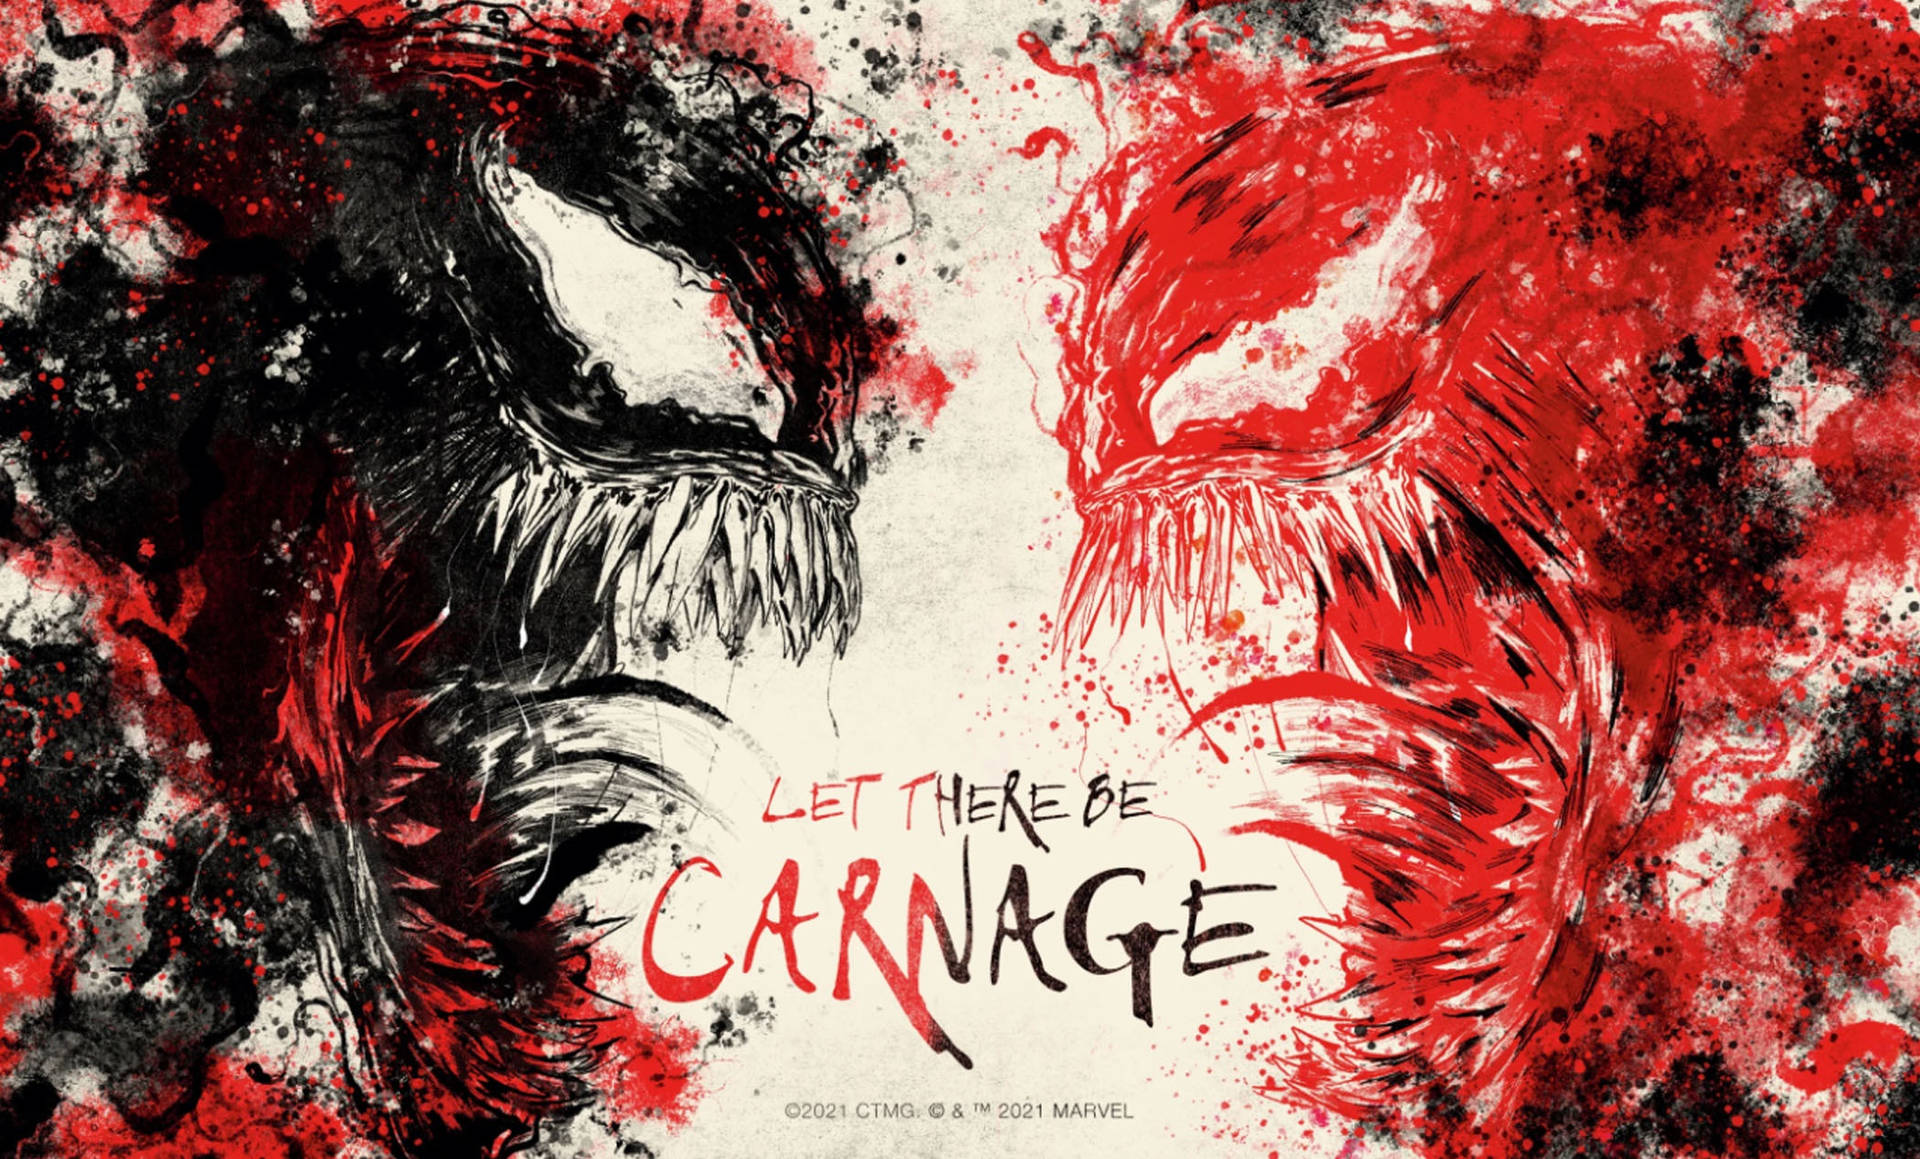 Venom Let There Be Carnage Art Wallpaper